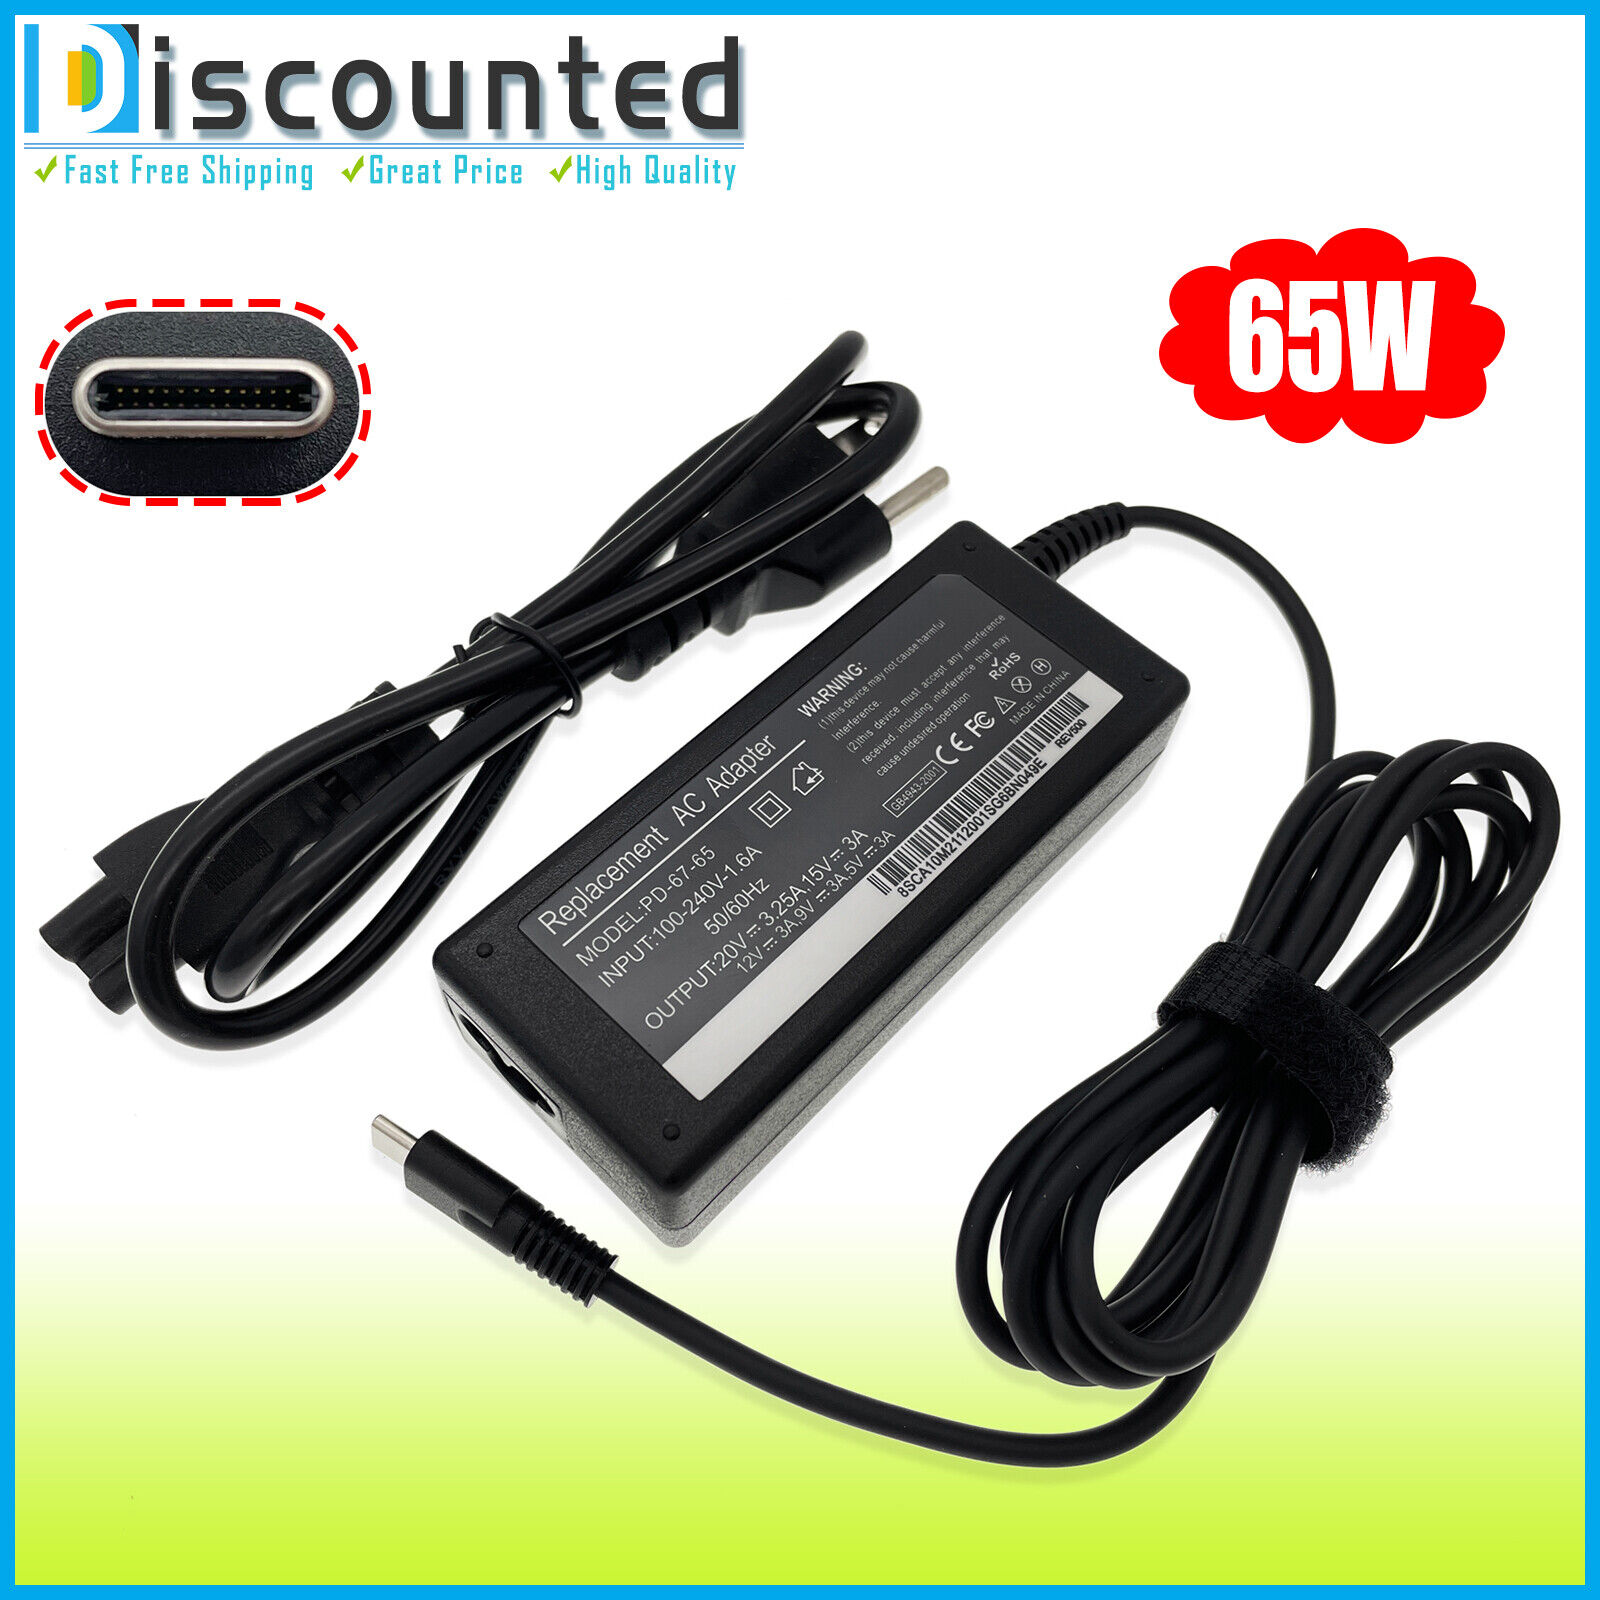 65W AC Power Adapter Charger For HP Chromebox G3 G4 / Pro c640 G2 Chromebook